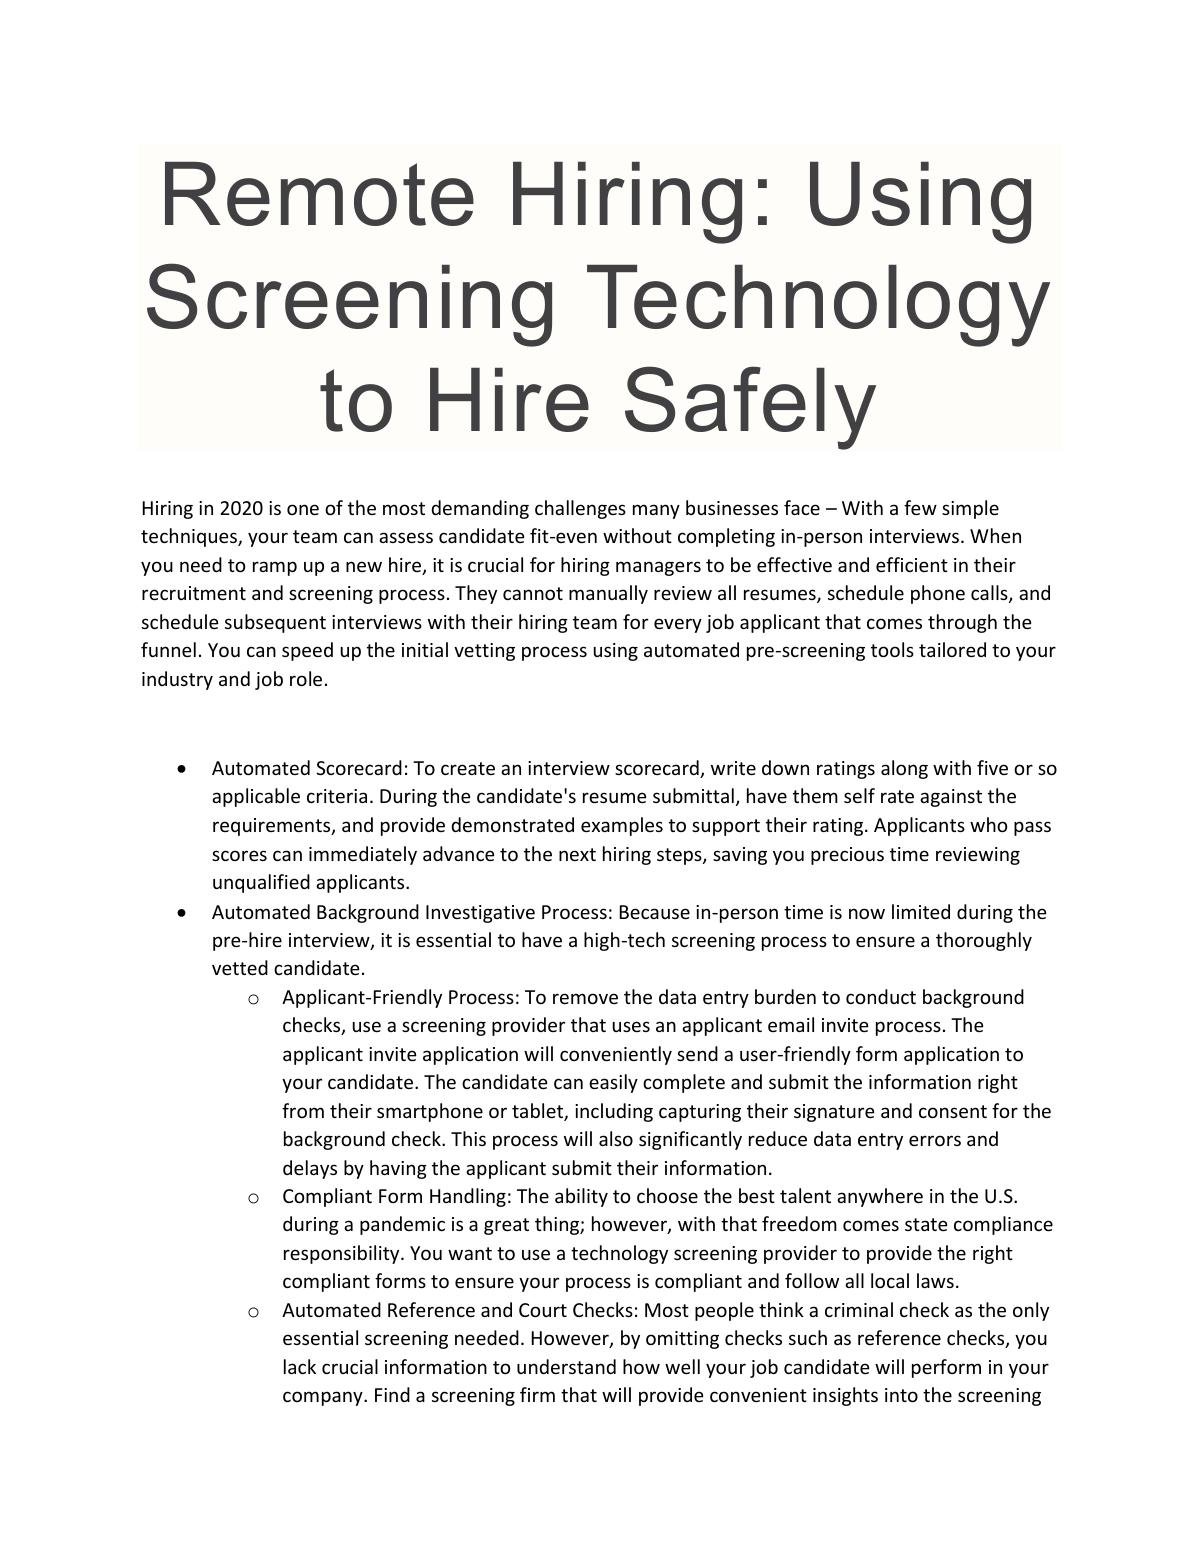 Remote Hiring: Using Screening Technology to Hire Safely